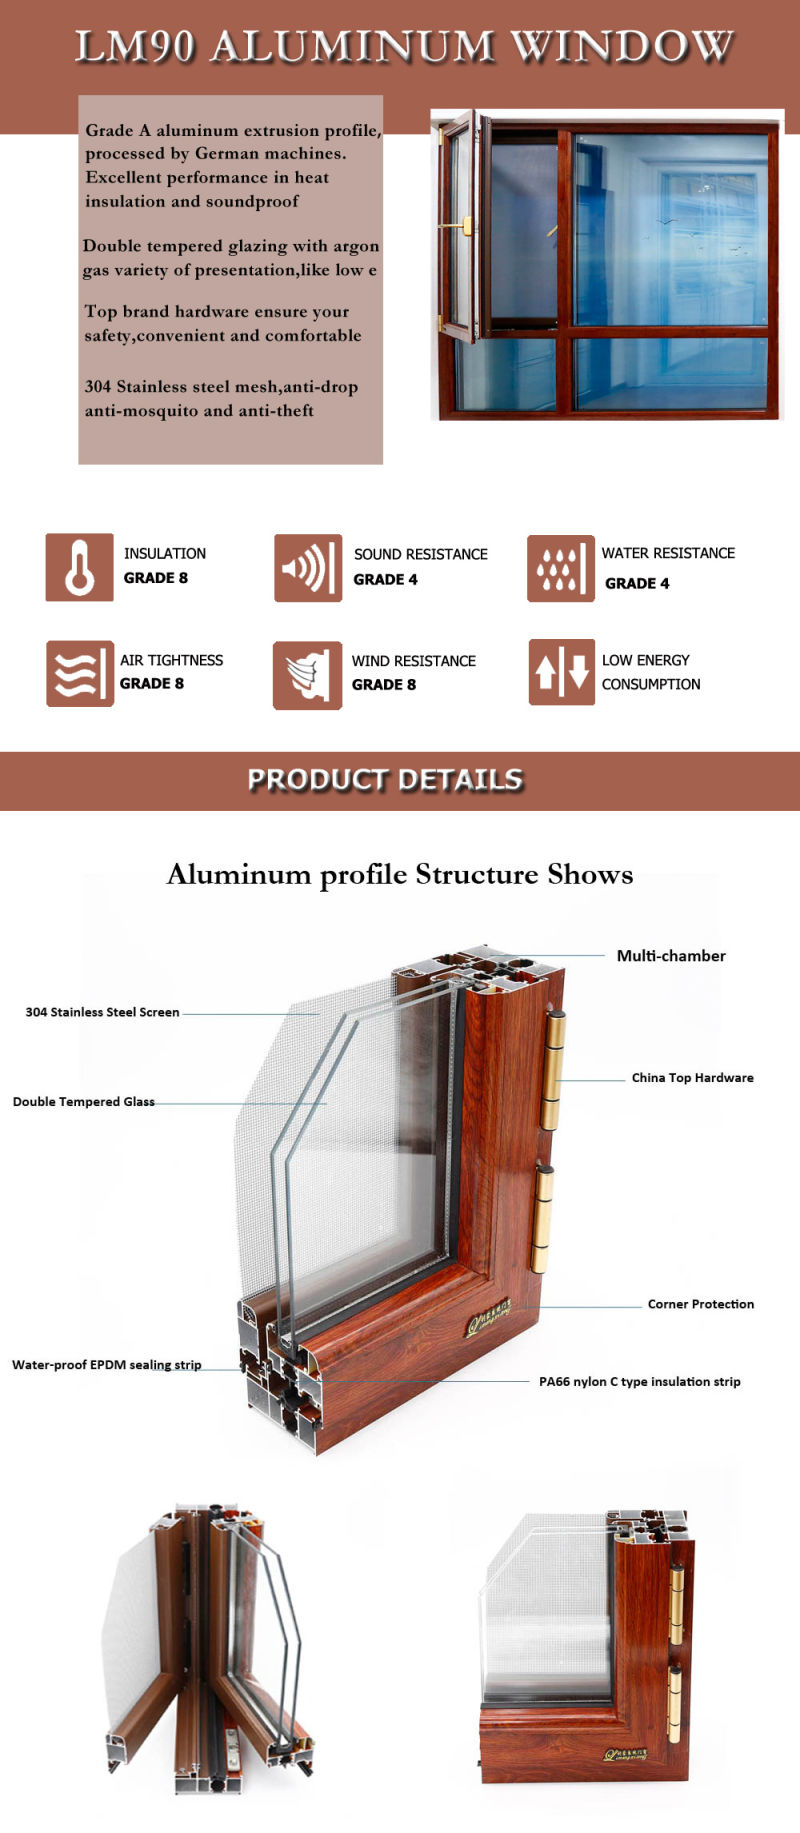 Lm90 Aluminum Window with Stainless Steel Mesh